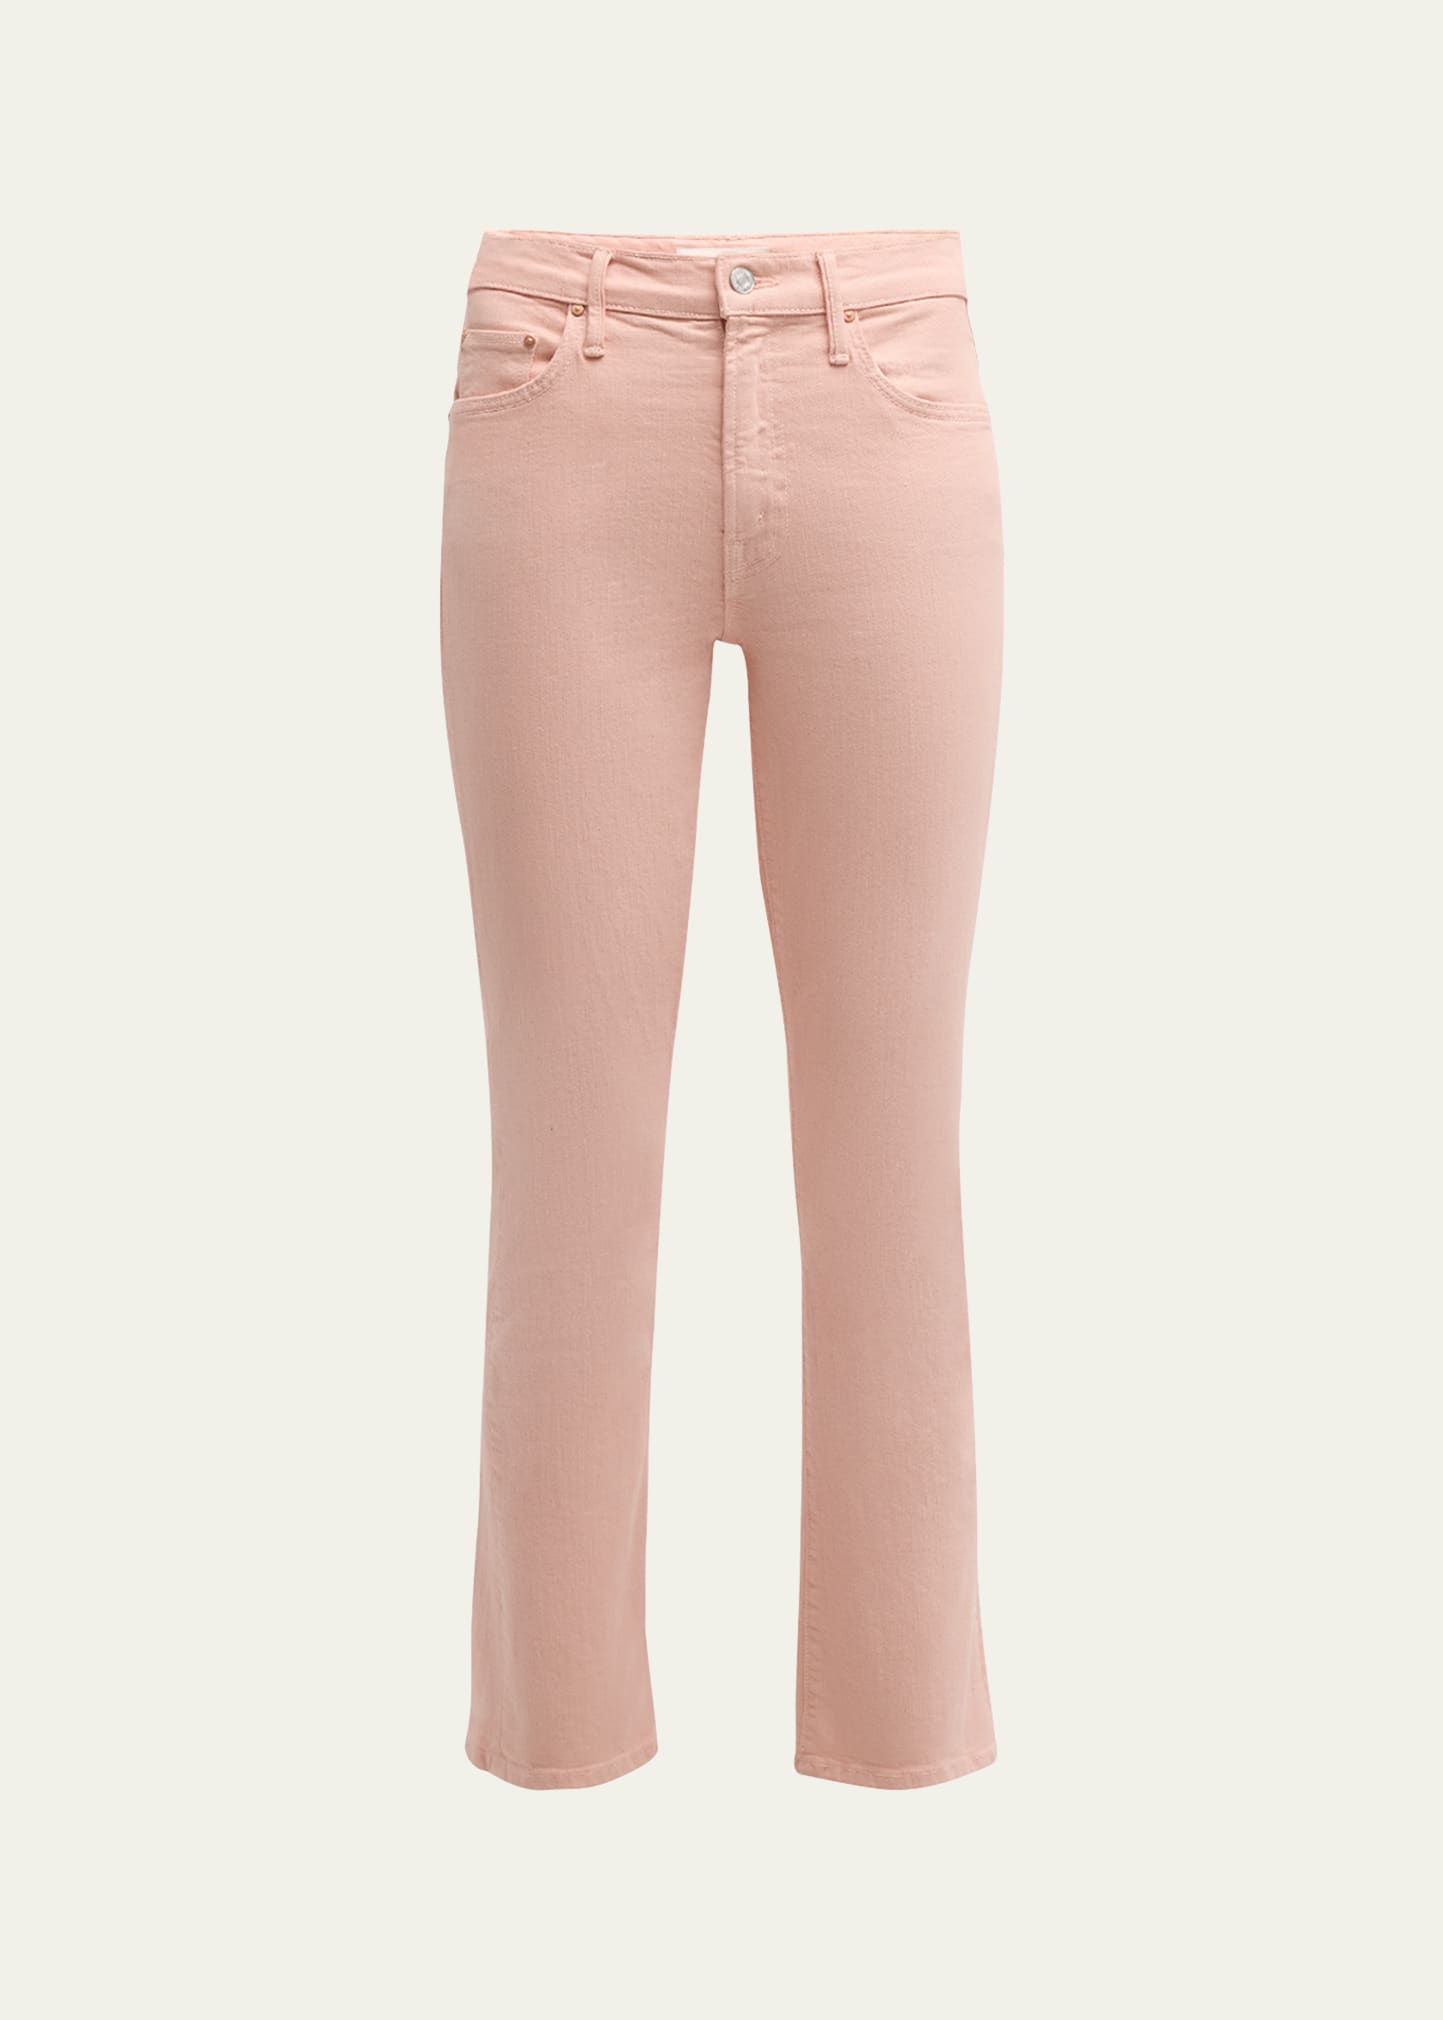 MOTHER The Insider Hover Jeans | Bergdorf Goodman